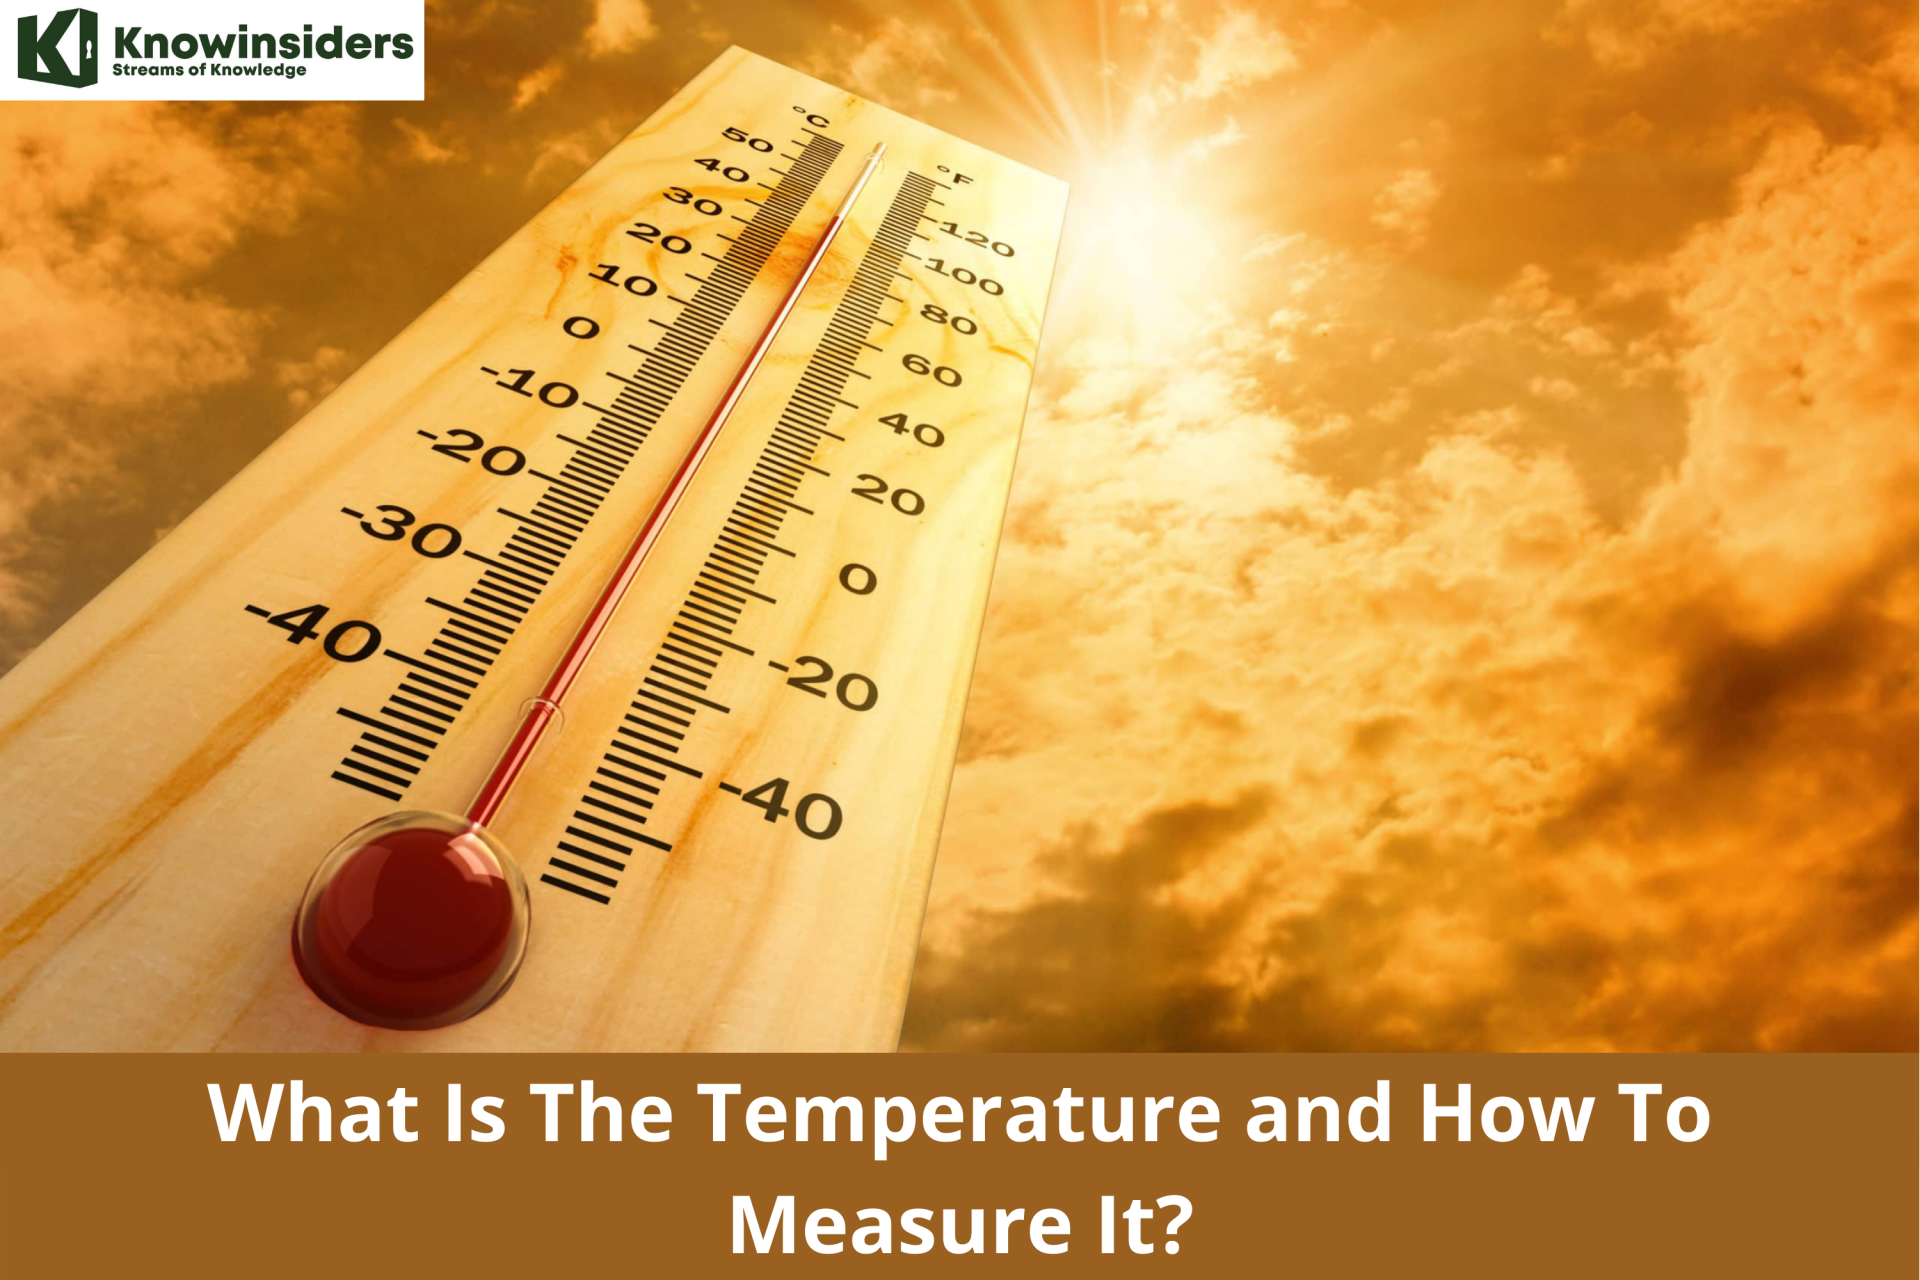 What Is The Temperature and How To Measure It?